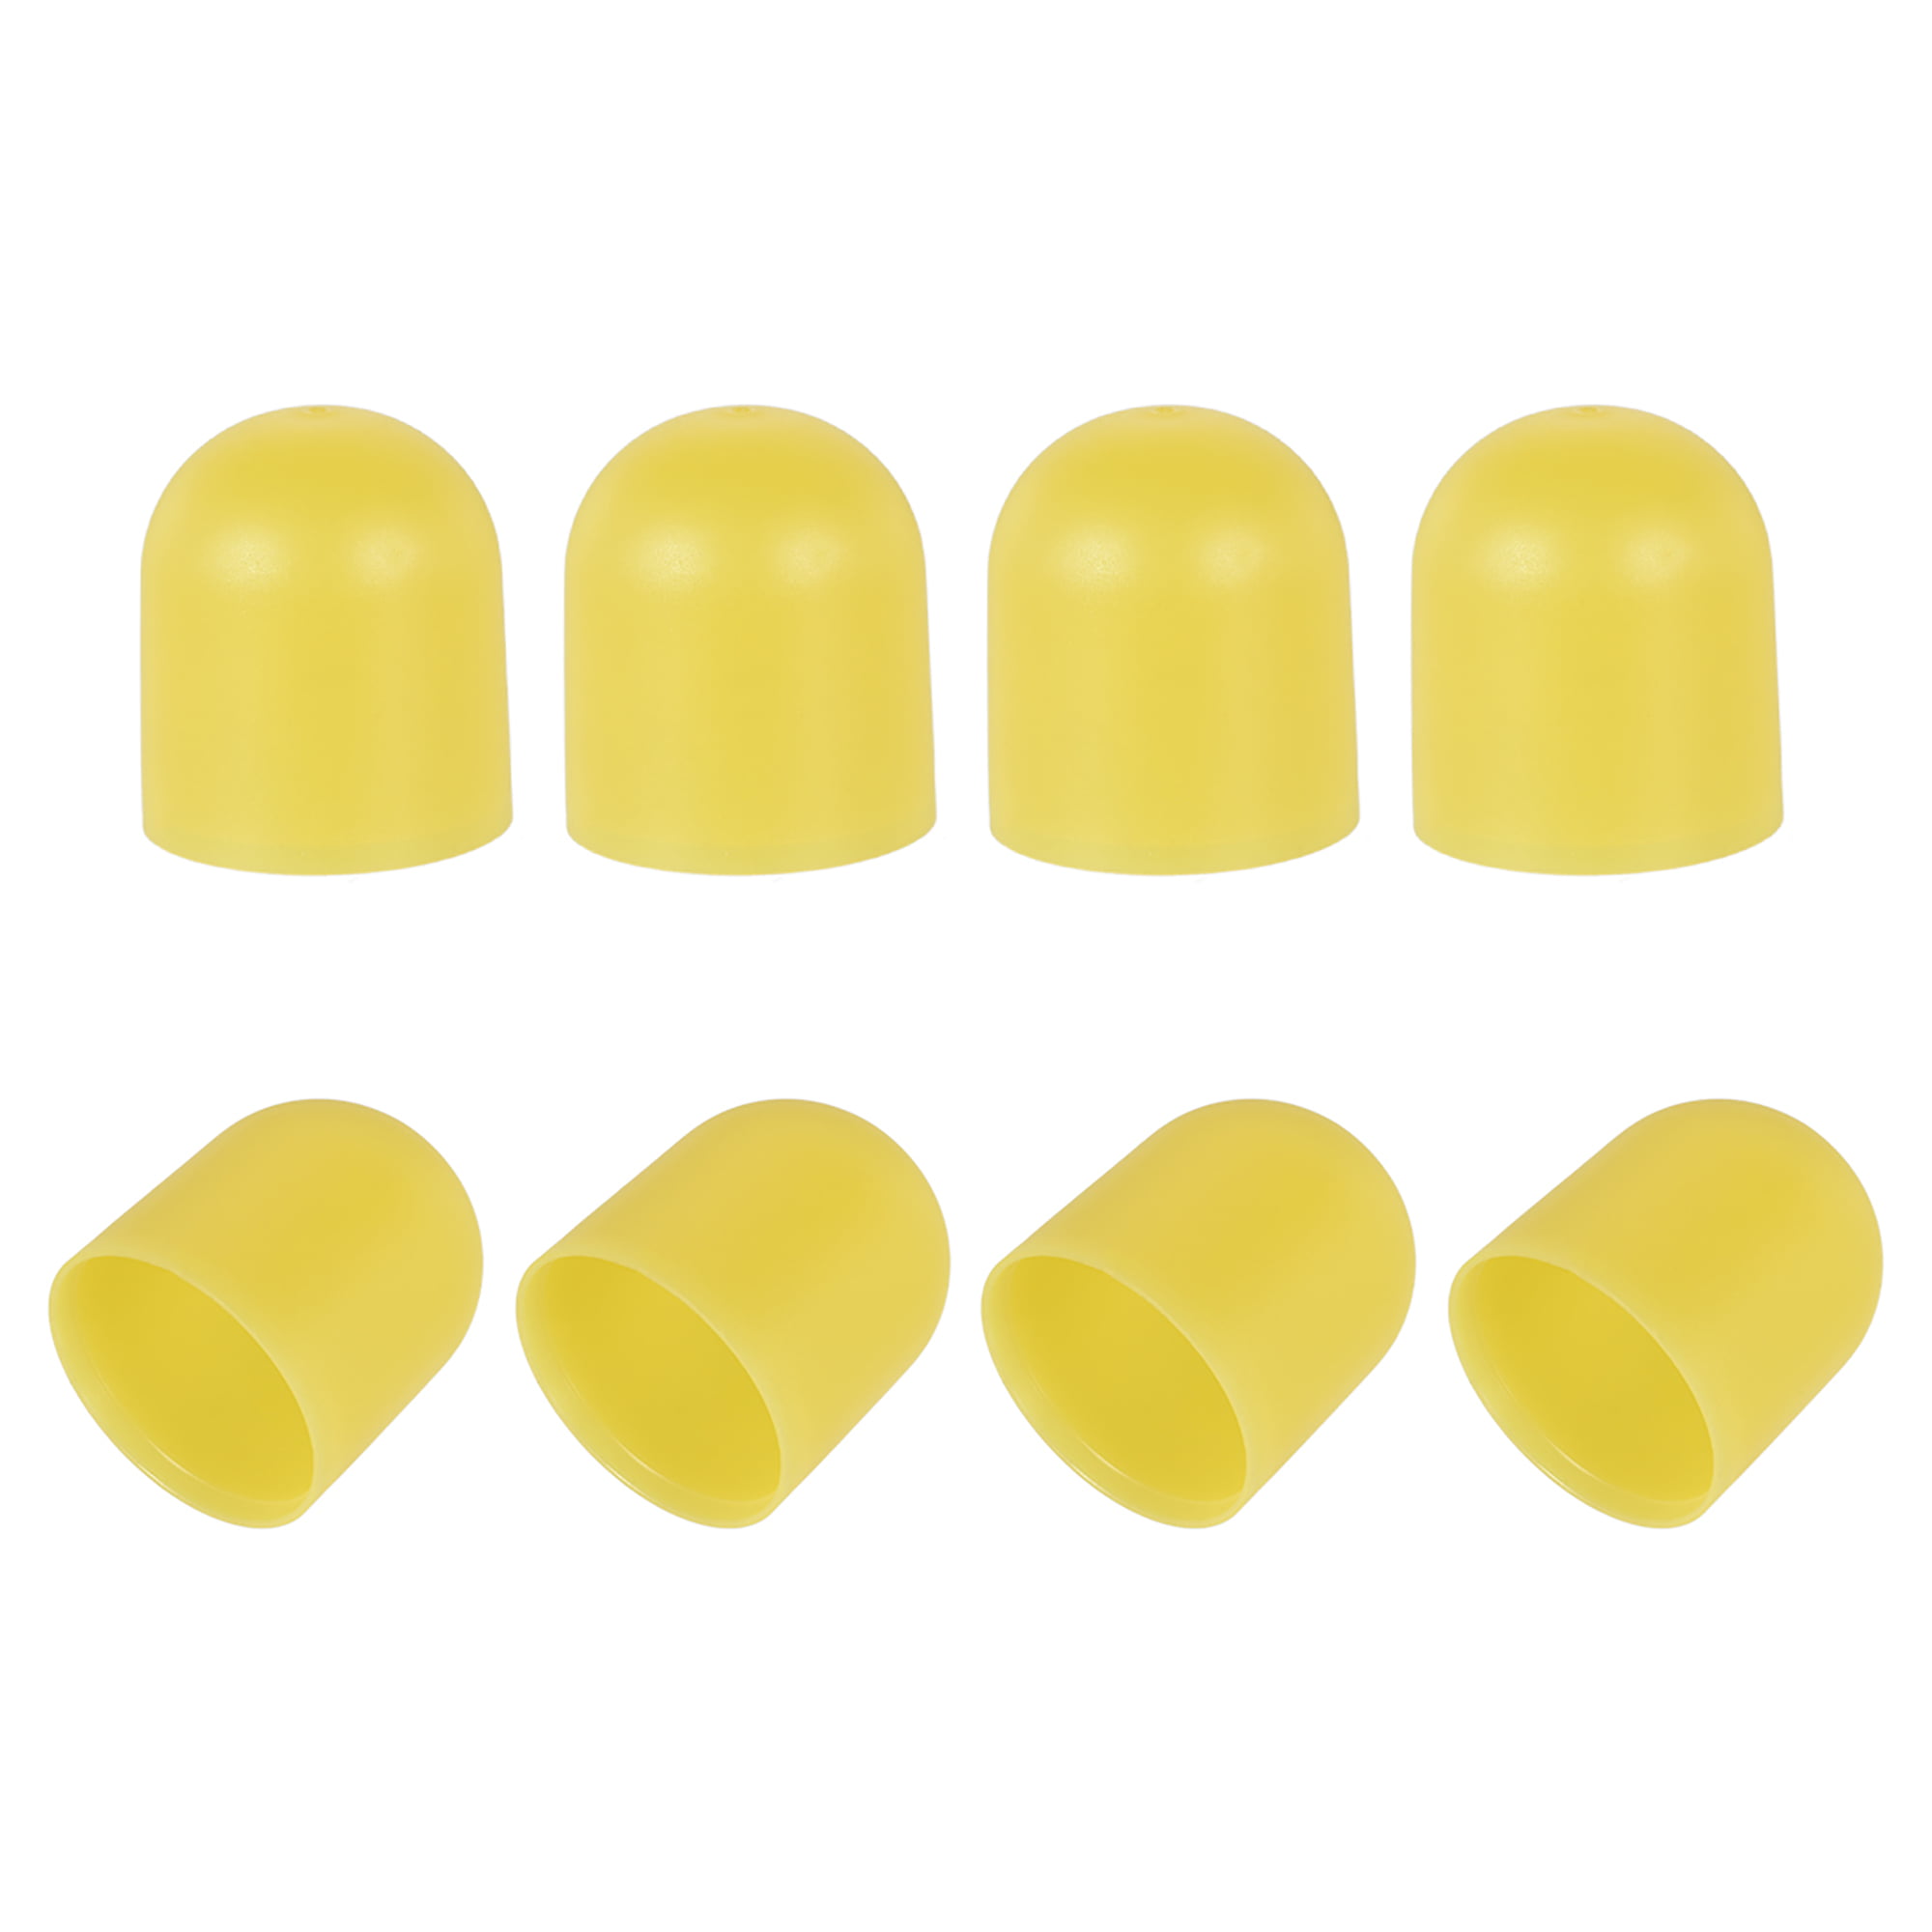 Yellow Details about   8PCS Motor Protector Cap for DJI for Phantom 3 for Phantom 4 All Series